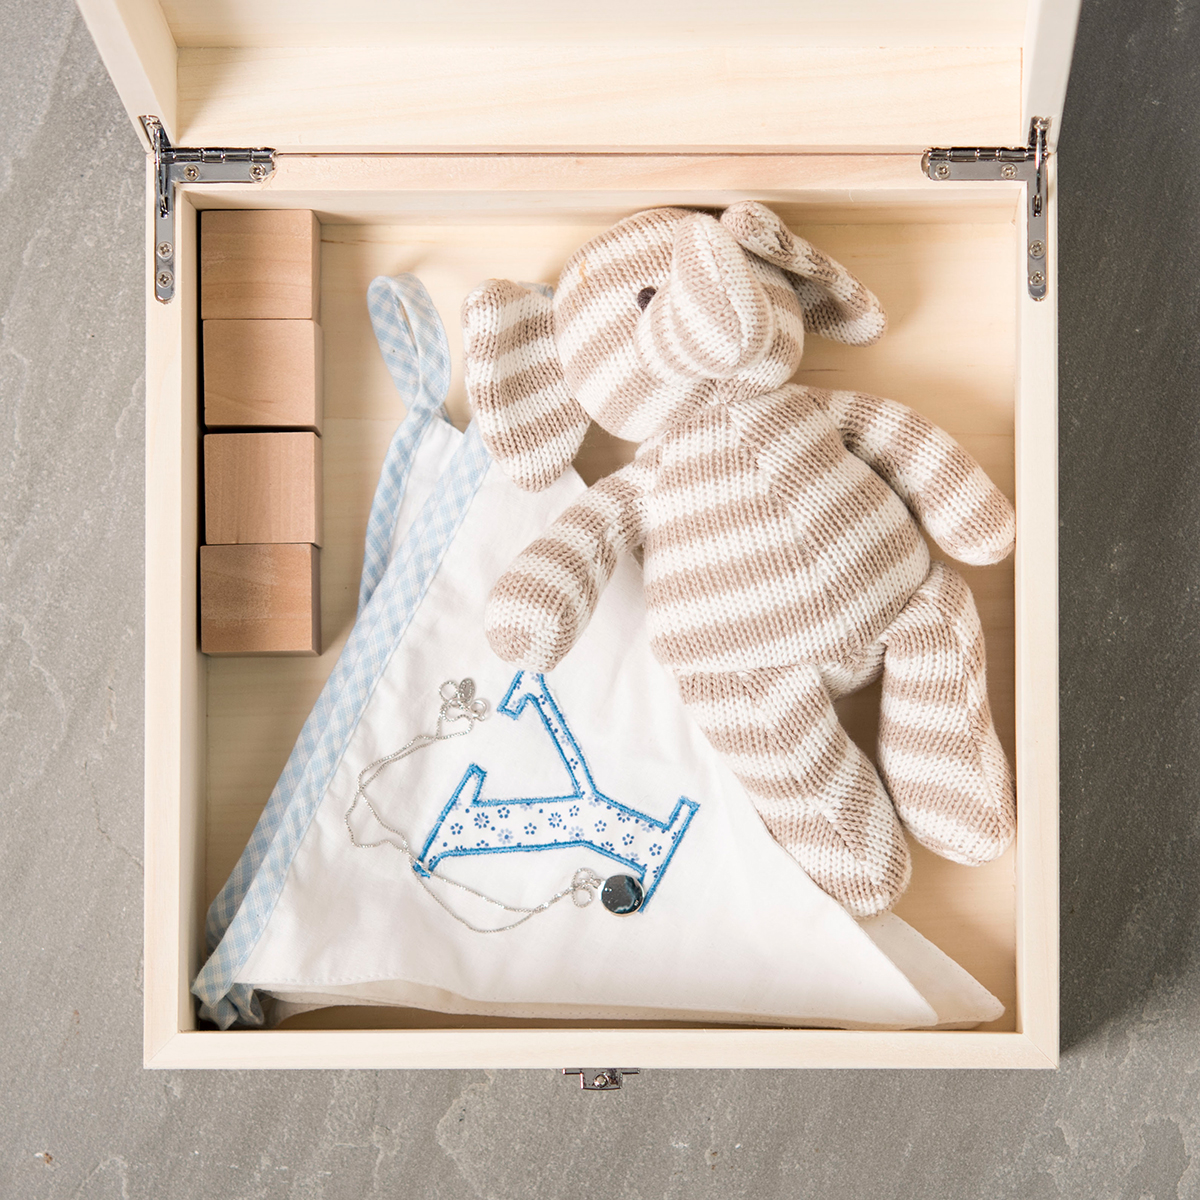 Personalised Storage Box - Our Precious First Memories